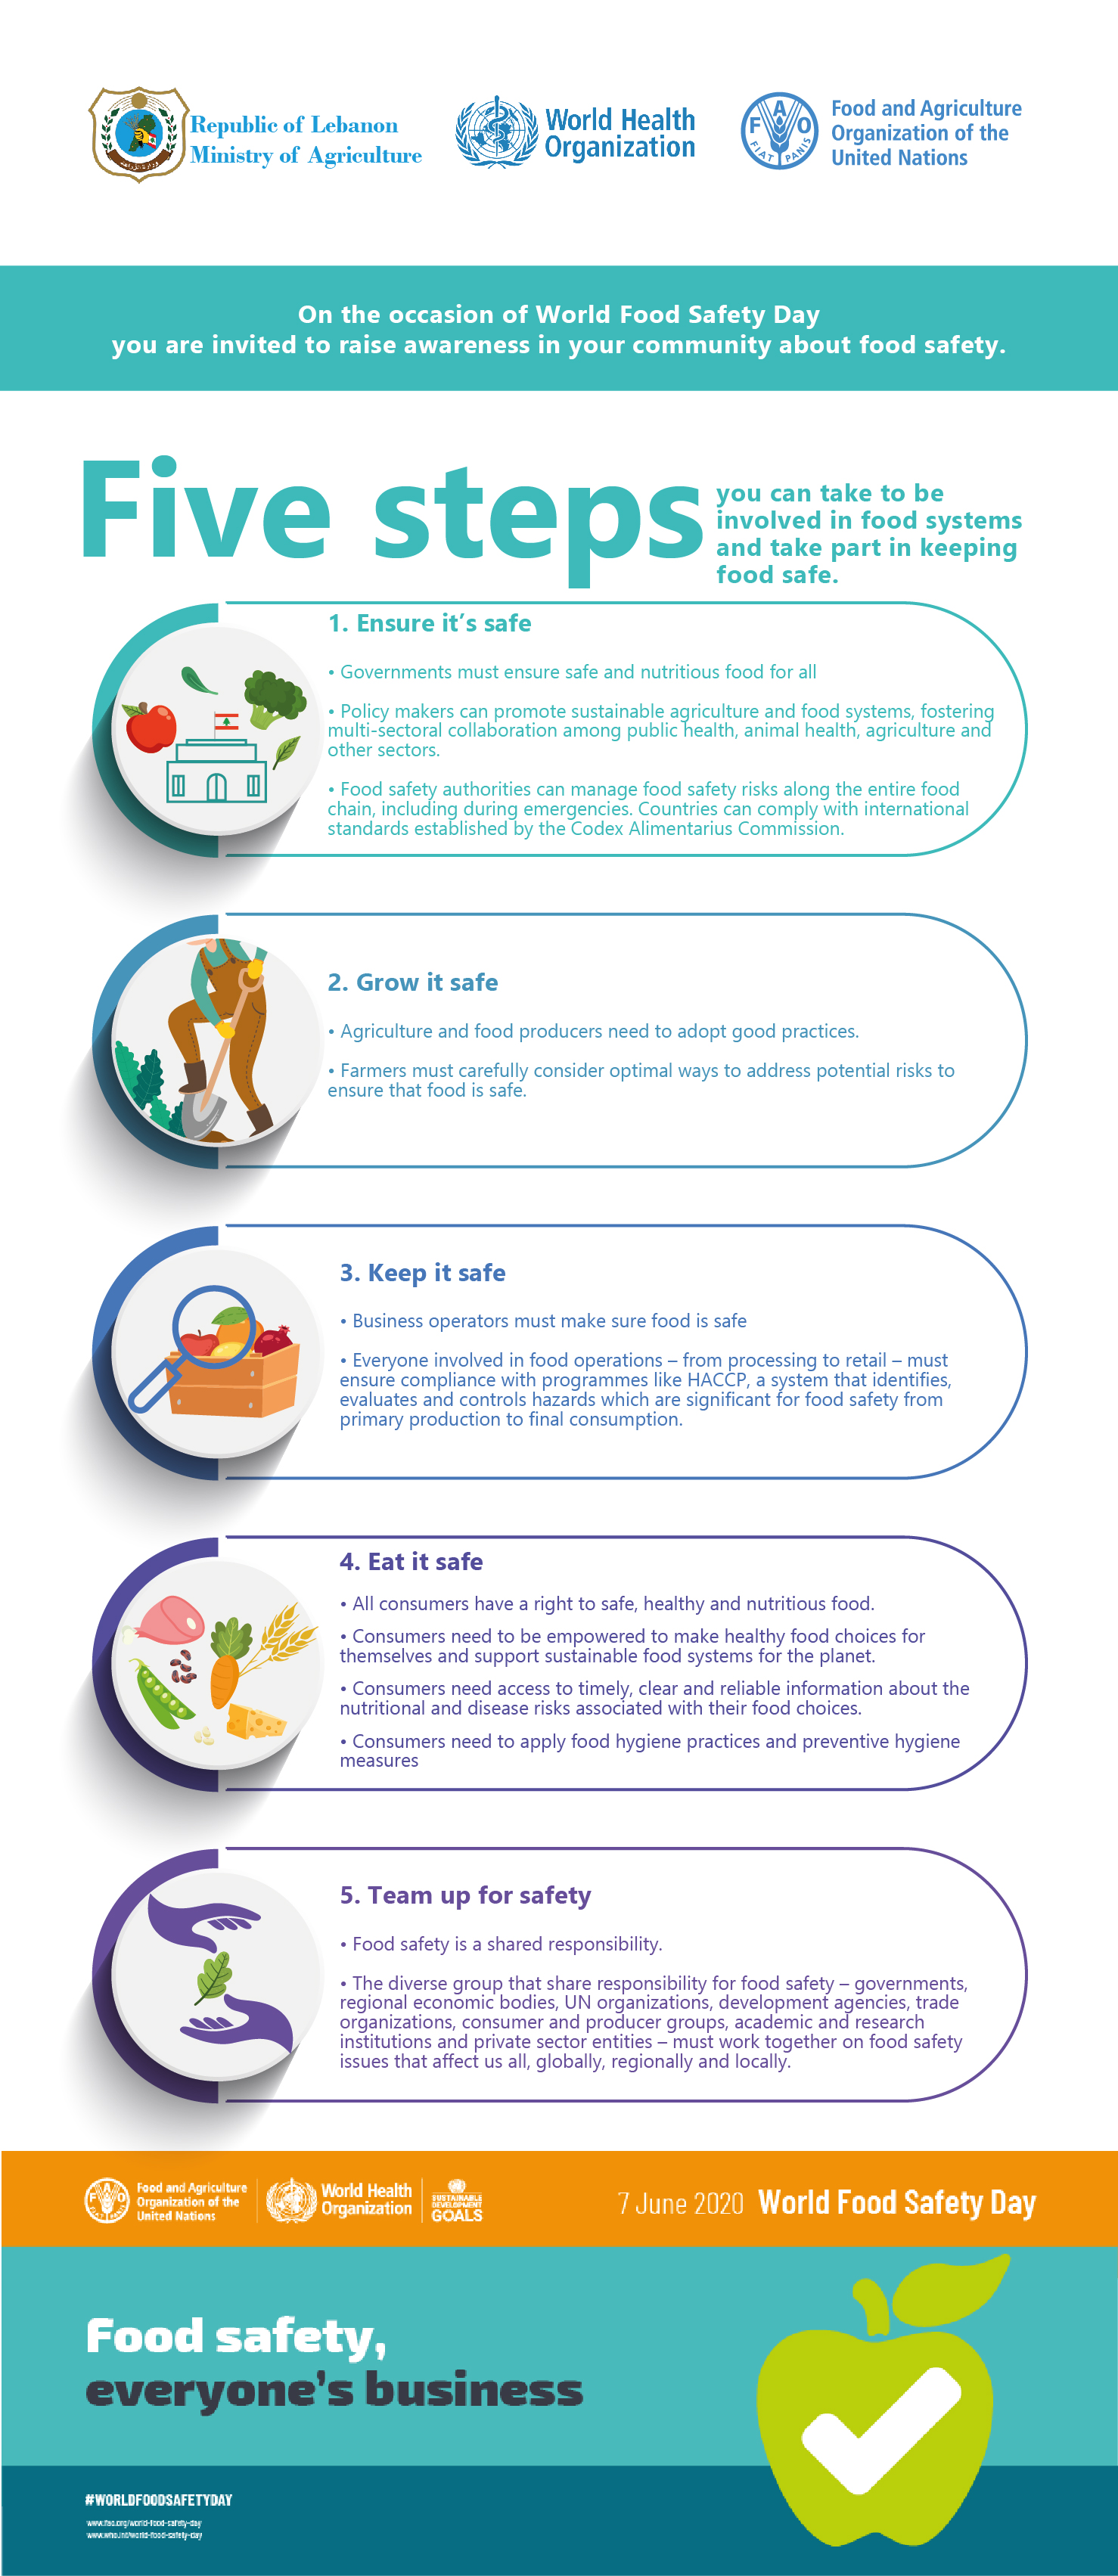 world-food-safety-day-en-infographic-29may2020-012020-06-06-06-56-59